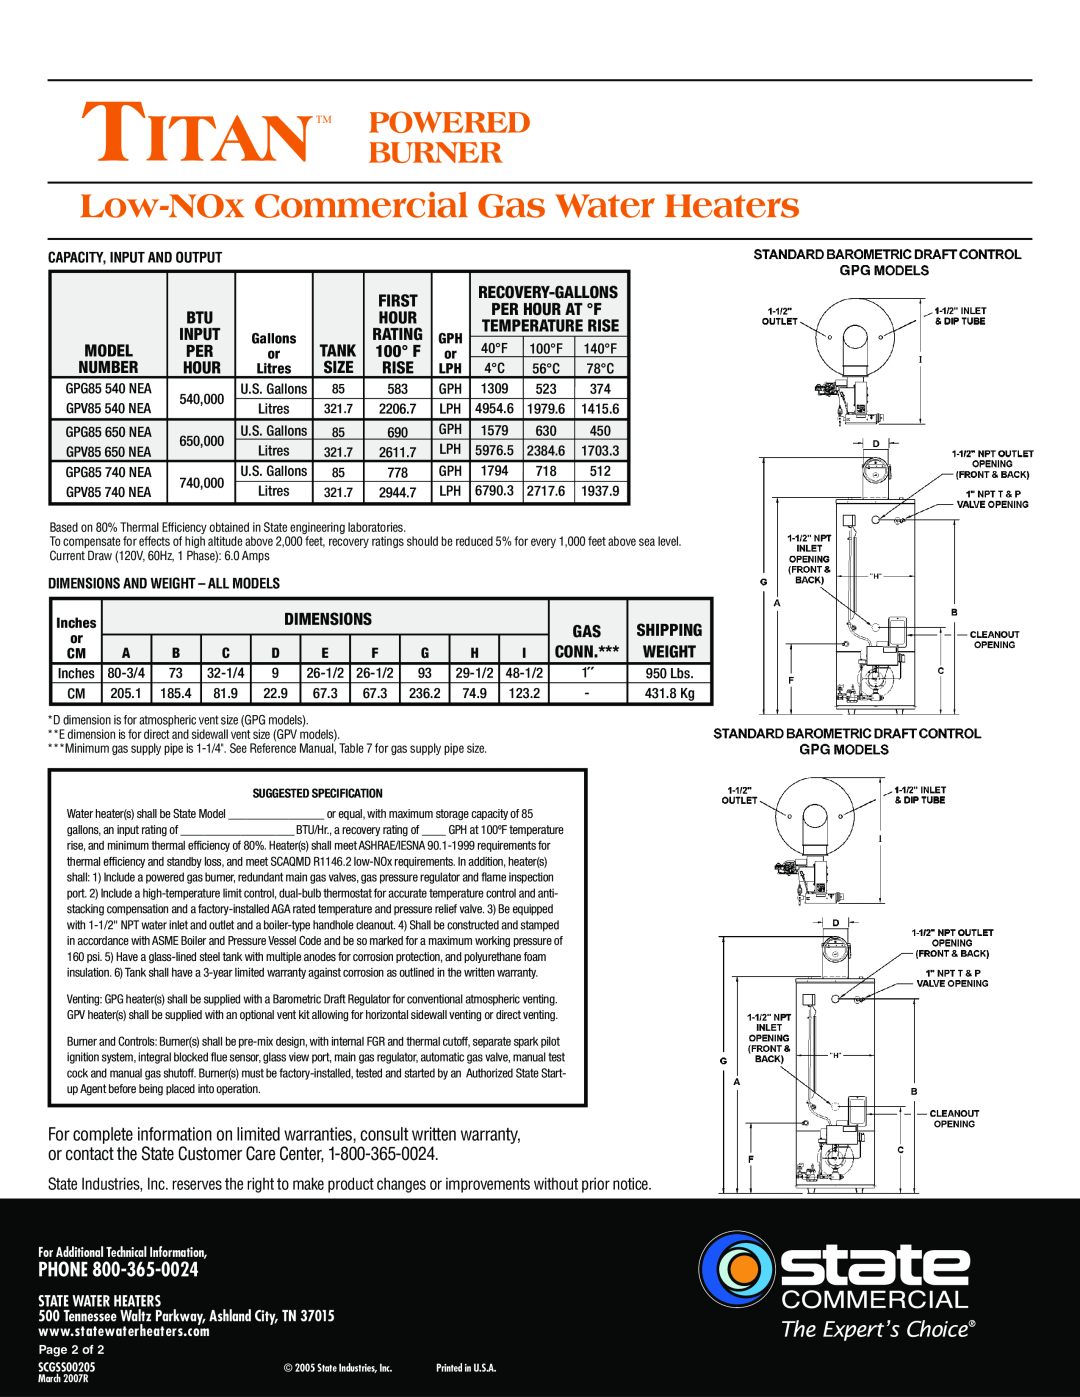 State Industries GPG85 650 NEA warranty Low-NOxCommercial Gas Water Heaters, Titan Powered Burner, Phone, First, Dimensions 